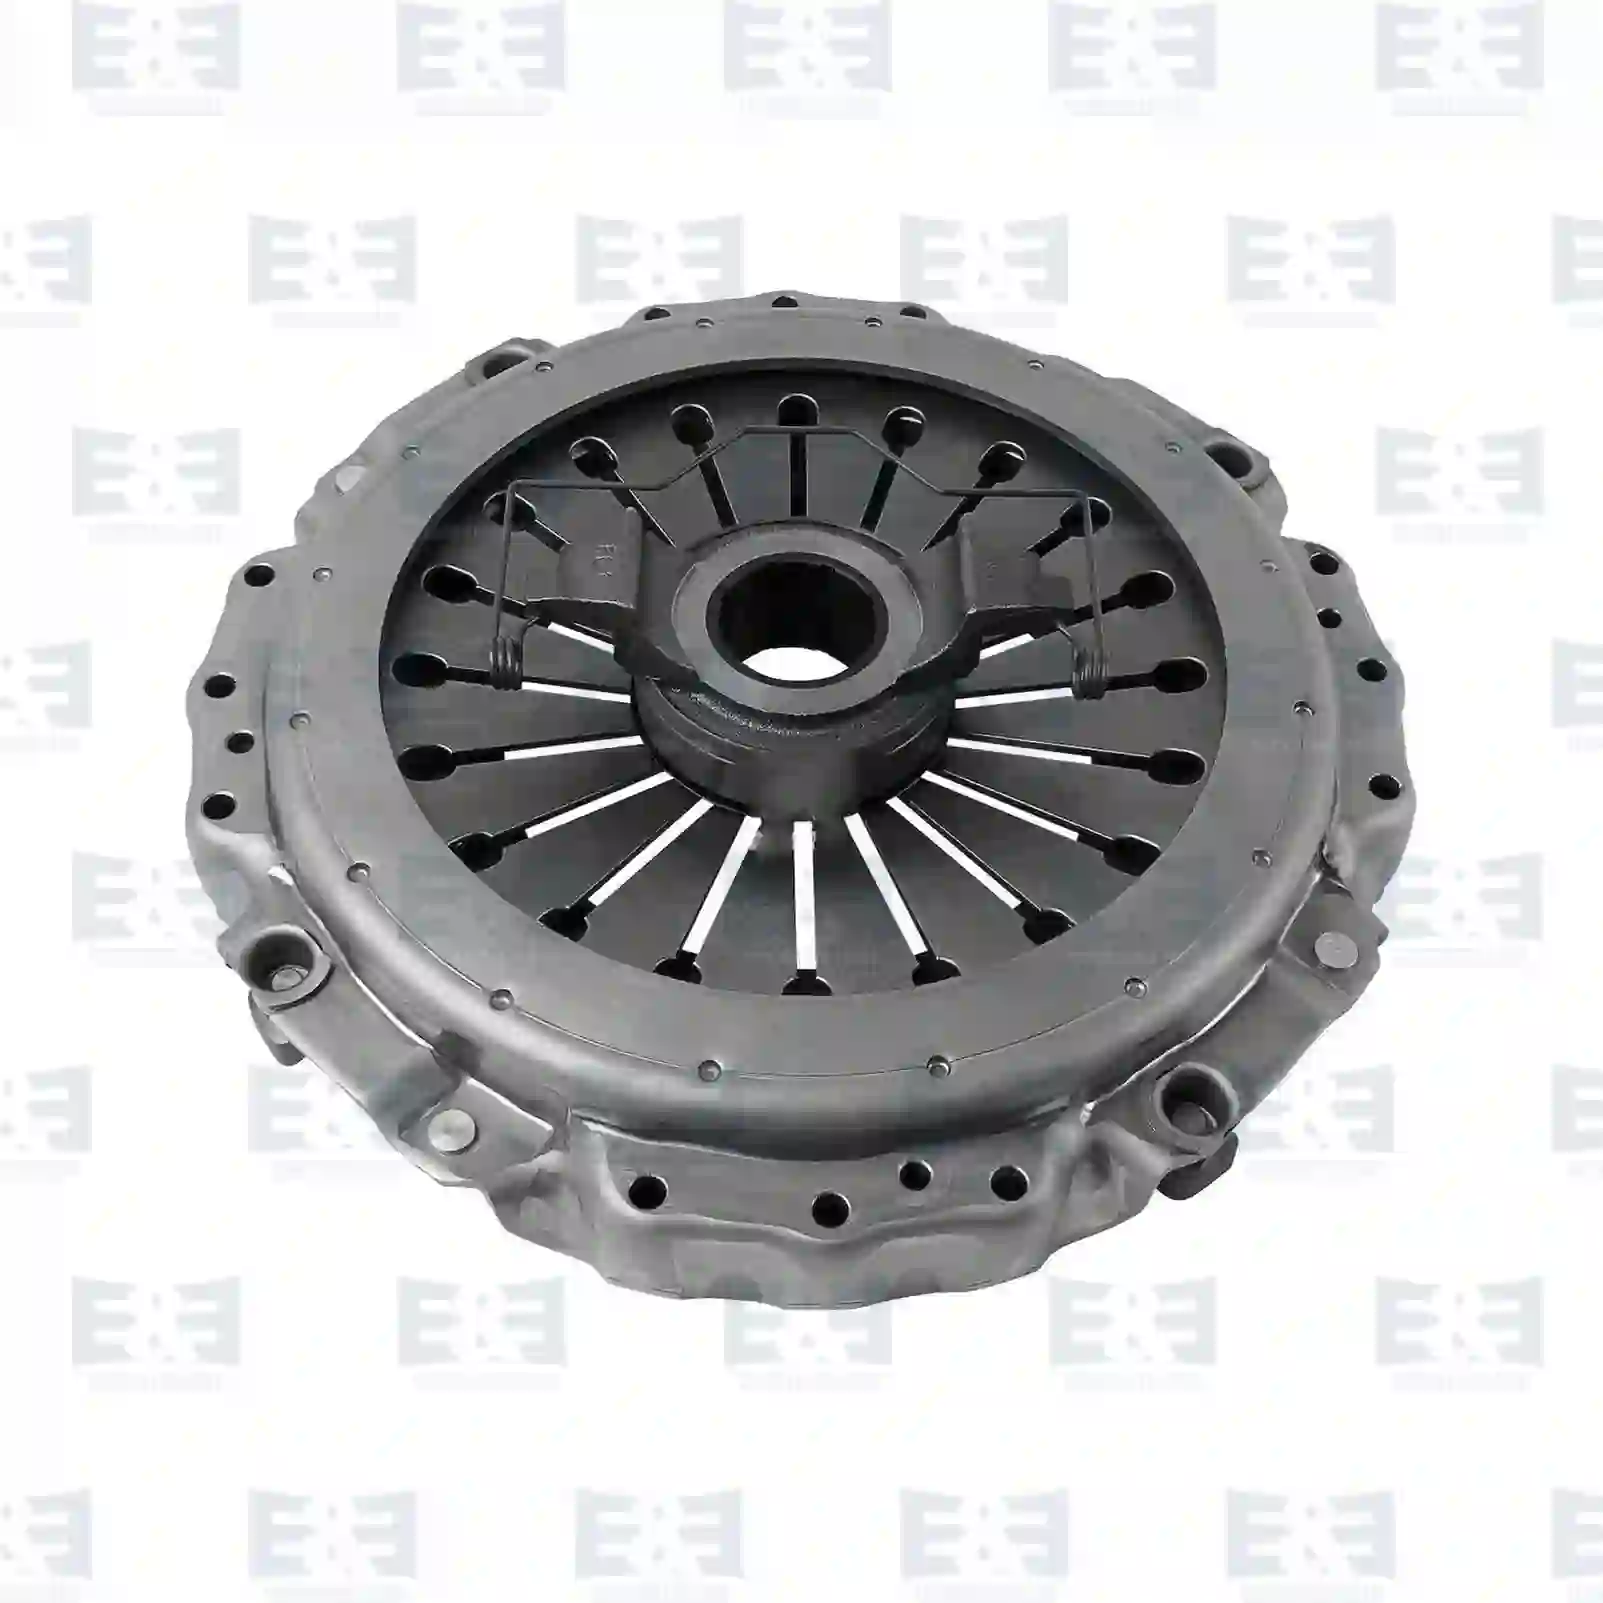 Clutch cover, with release bearing, 2E2288847, 1521721, 1669116, 1669827, 1672935, 20569126, 20575561, 3192200, 3192210, 8113463, 8113513, 8113529, 8116463, 8116513, 8119463, 8119513, 8119529, 85000393, 85000523, 85000527, 85006393 ||  2E2288847 E&E Truck Spare Parts | Truck Spare Parts, Auotomotive Spare Parts Clutch cover, with release bearing, 2E2288847, 1521721, 1669116, 1669827, 1672935, 20569126, 20575561, 3192200, 3192210, 8113463, 8113513, 8113529, 8116463, 8116513, 8119463, 8119513, 8119529, 85000393, 85000523, 85000527, 85006393 ||  2E2288847 E&E Truck Spare Parts | Truck Spare Parts, Auotomotive Spare Parts